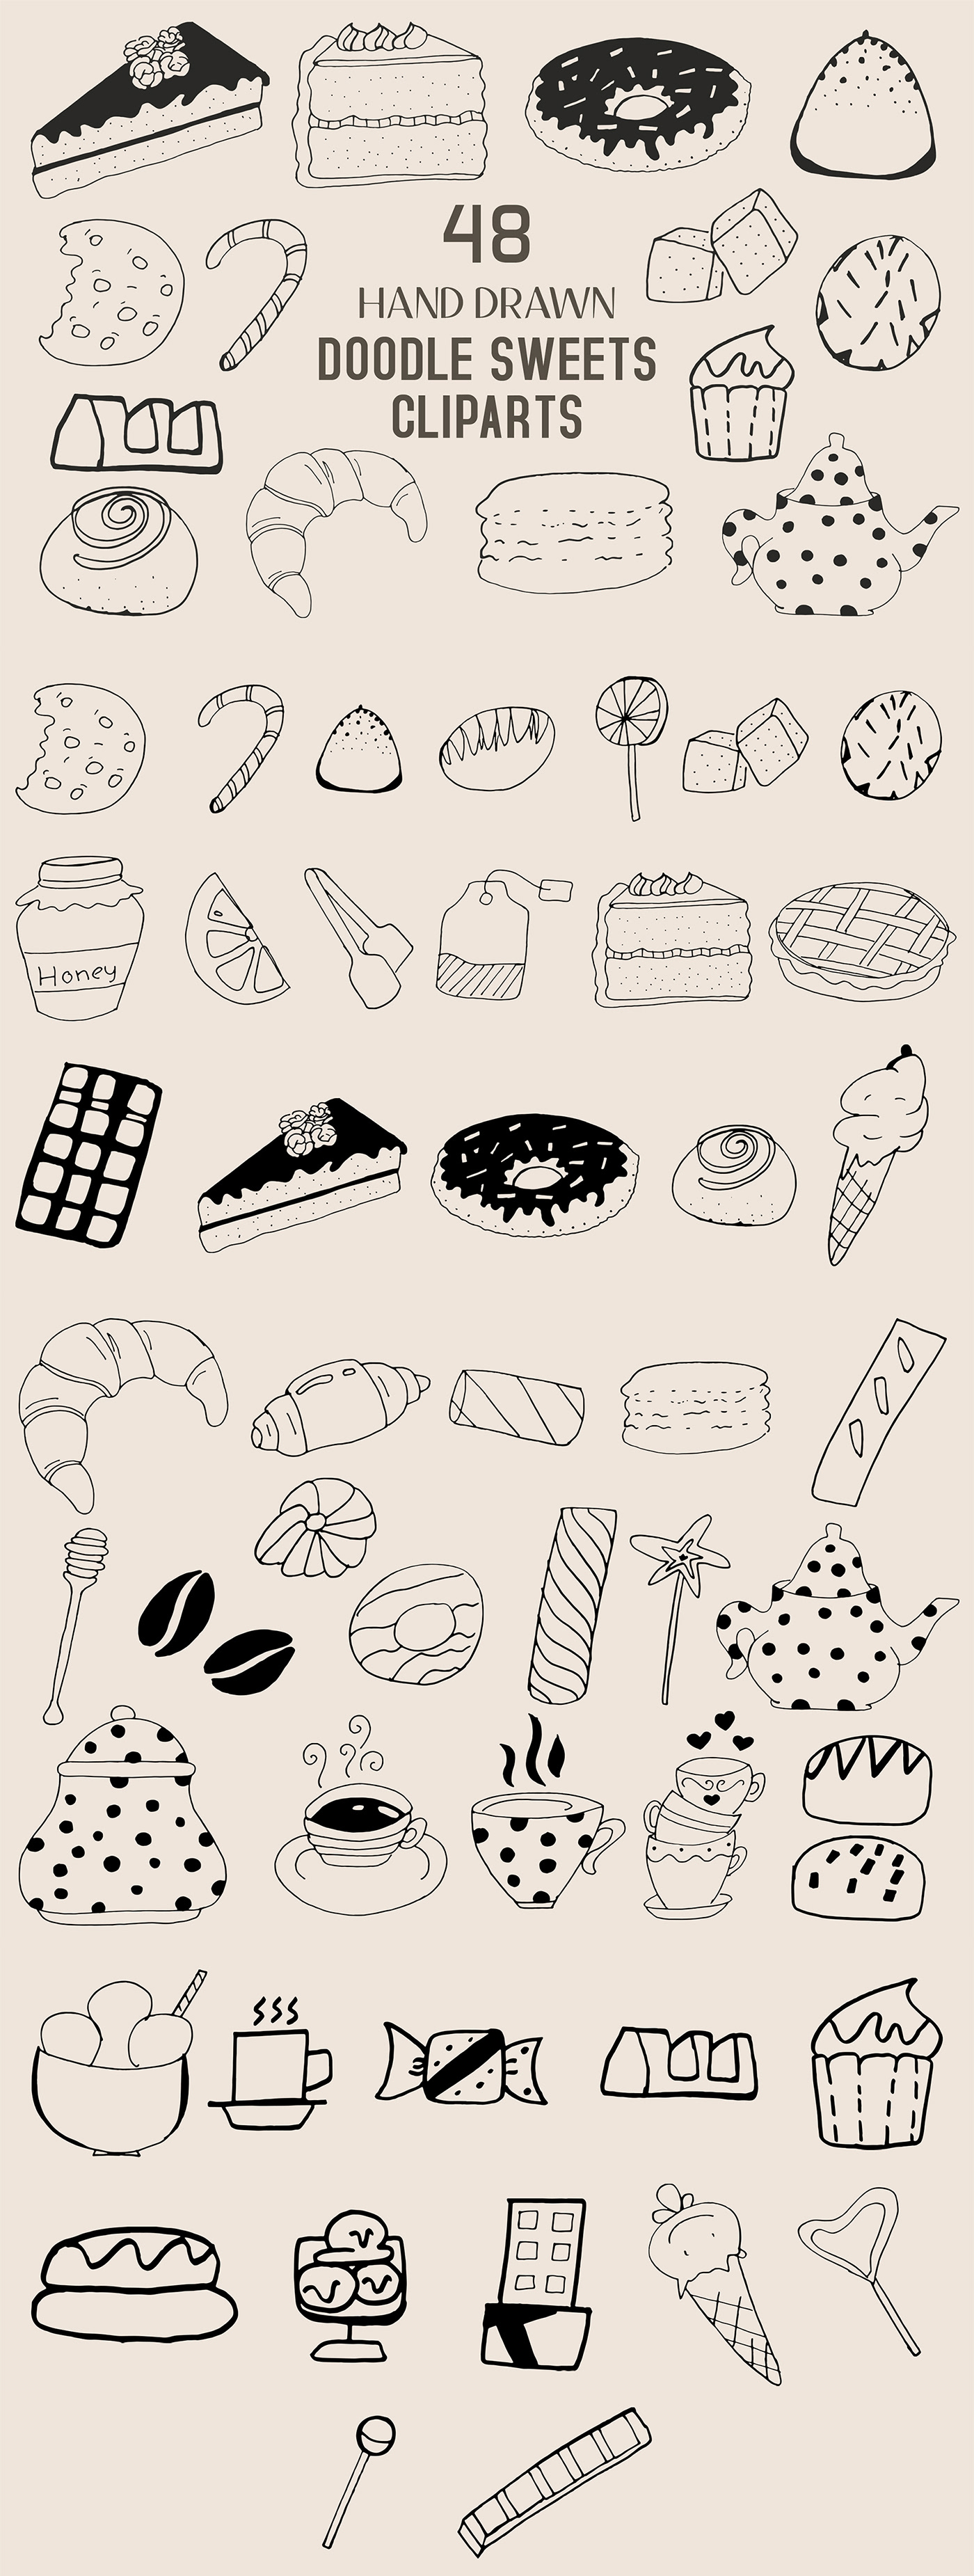 45+ Free Handmade Doodle Sweets Cliparts is a high class creative and innovate handful collection.